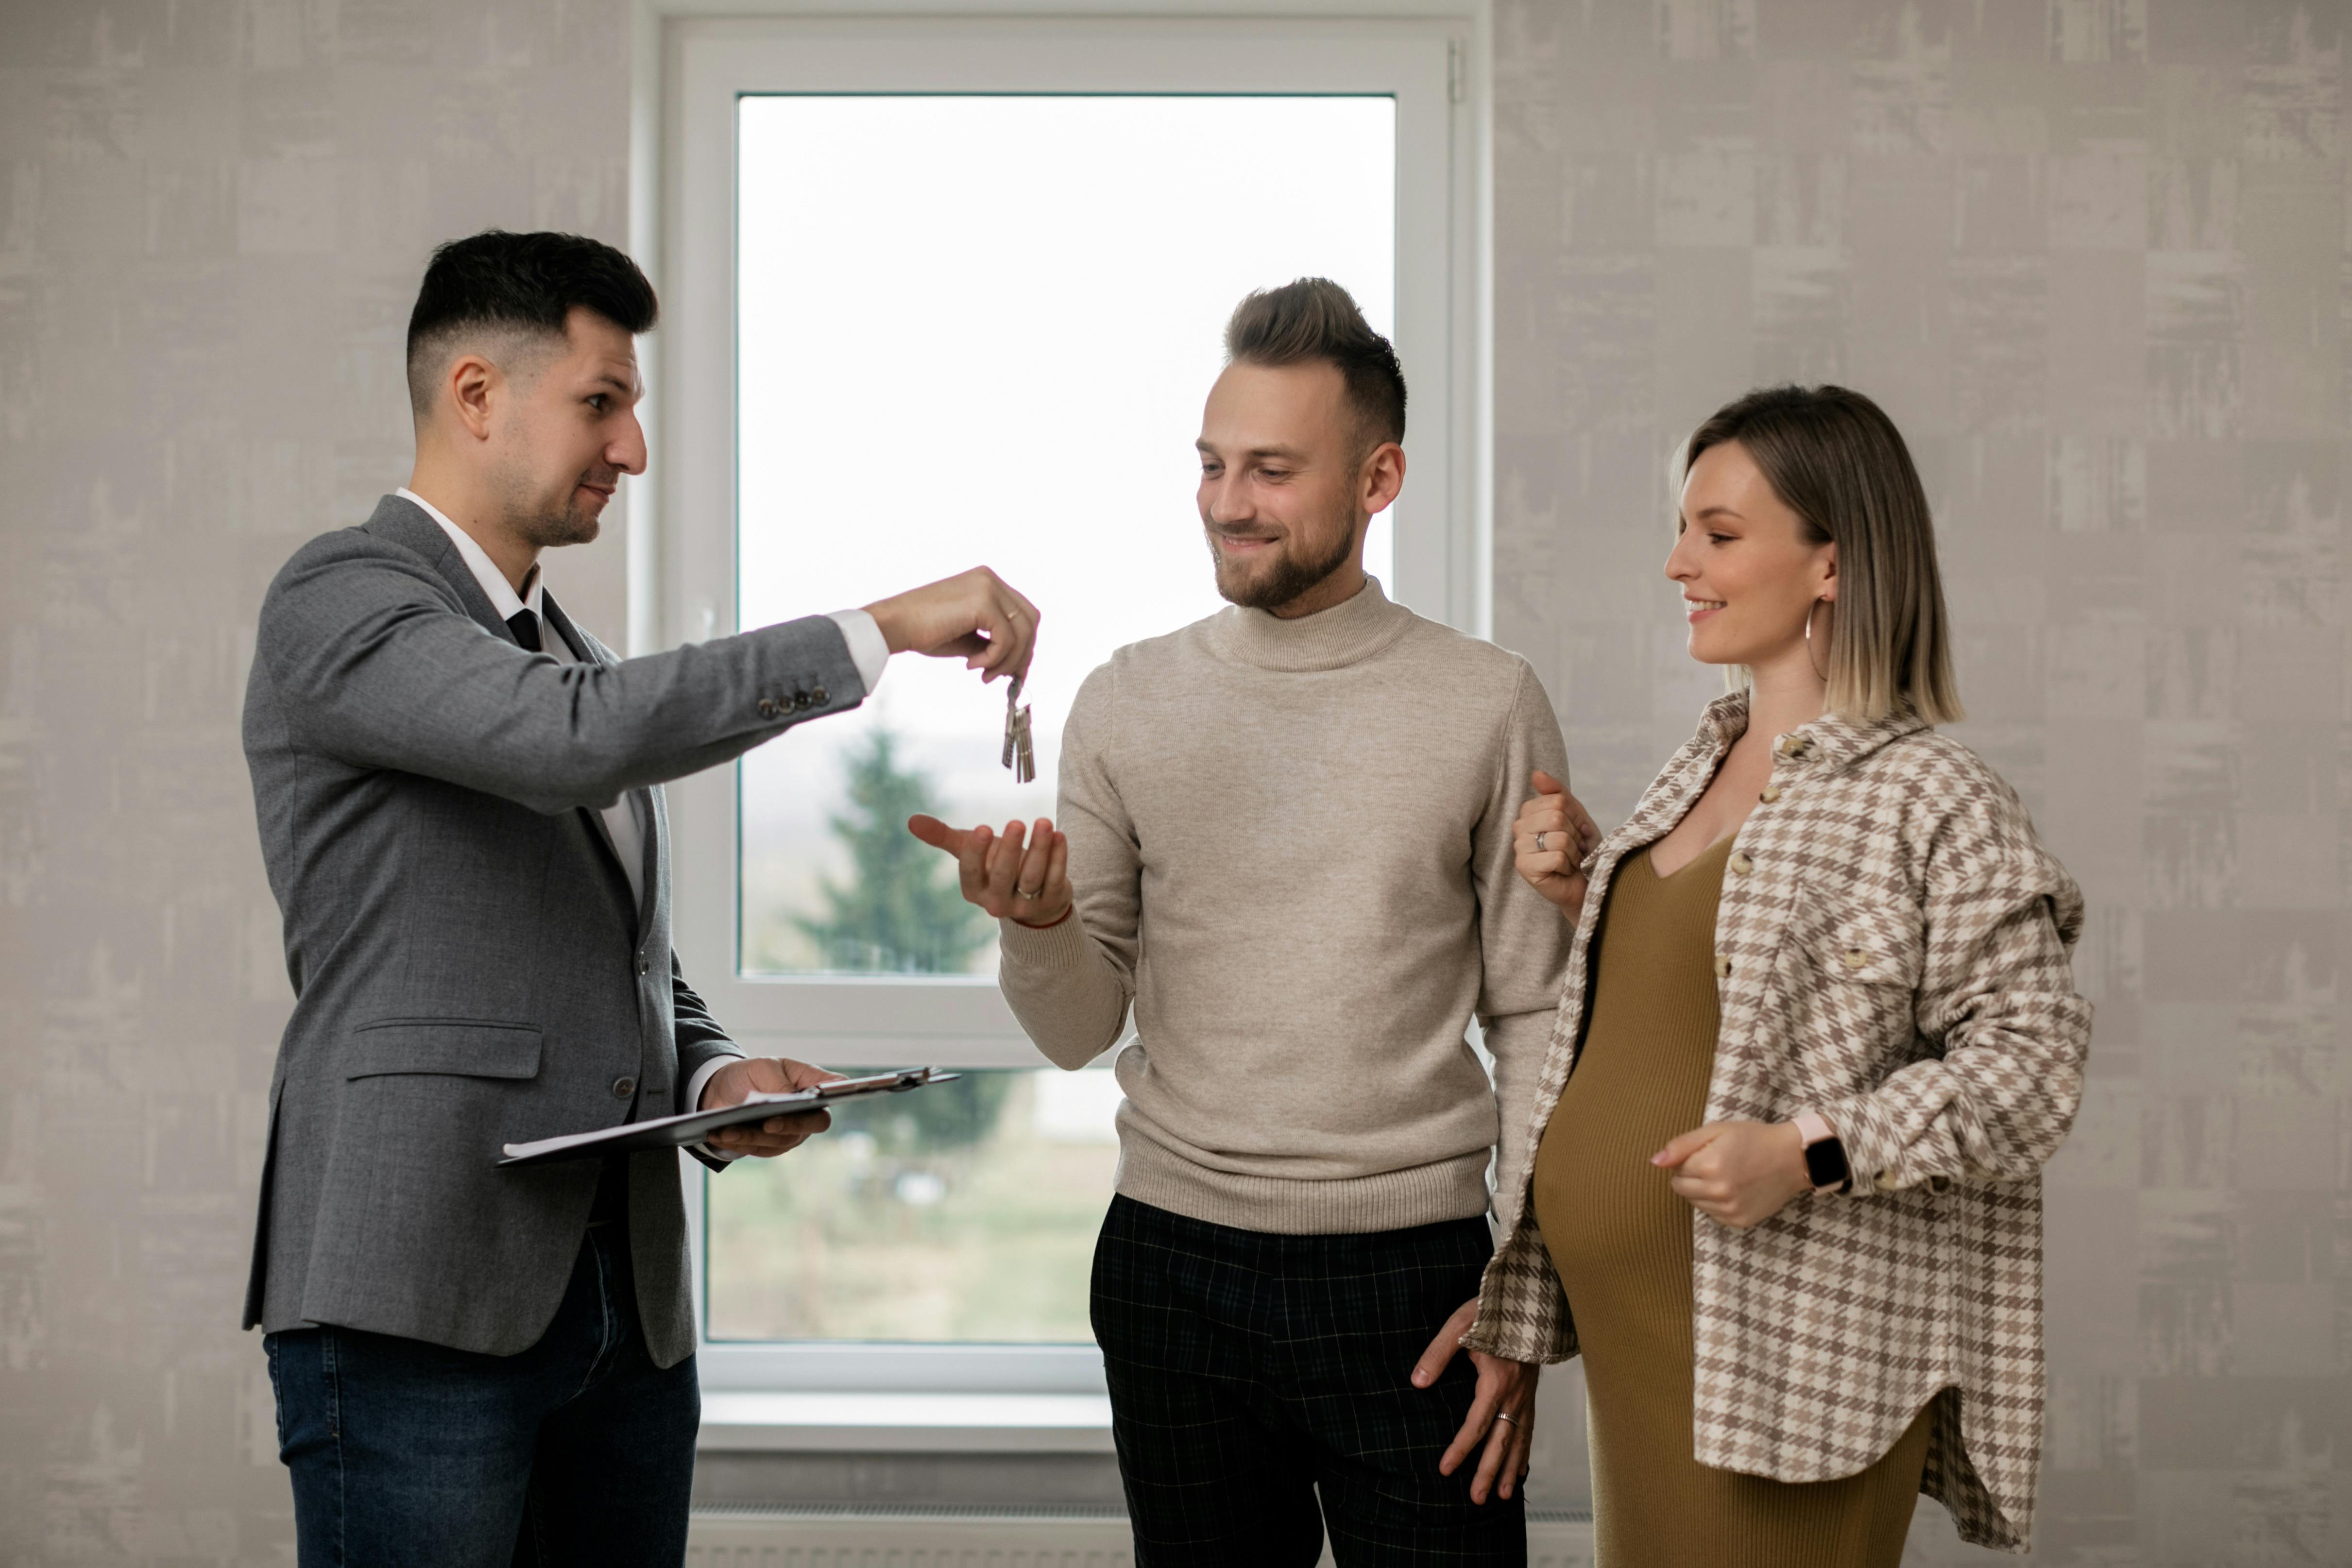 A real estate agent handing the key to new homeowners | Source: Pexels